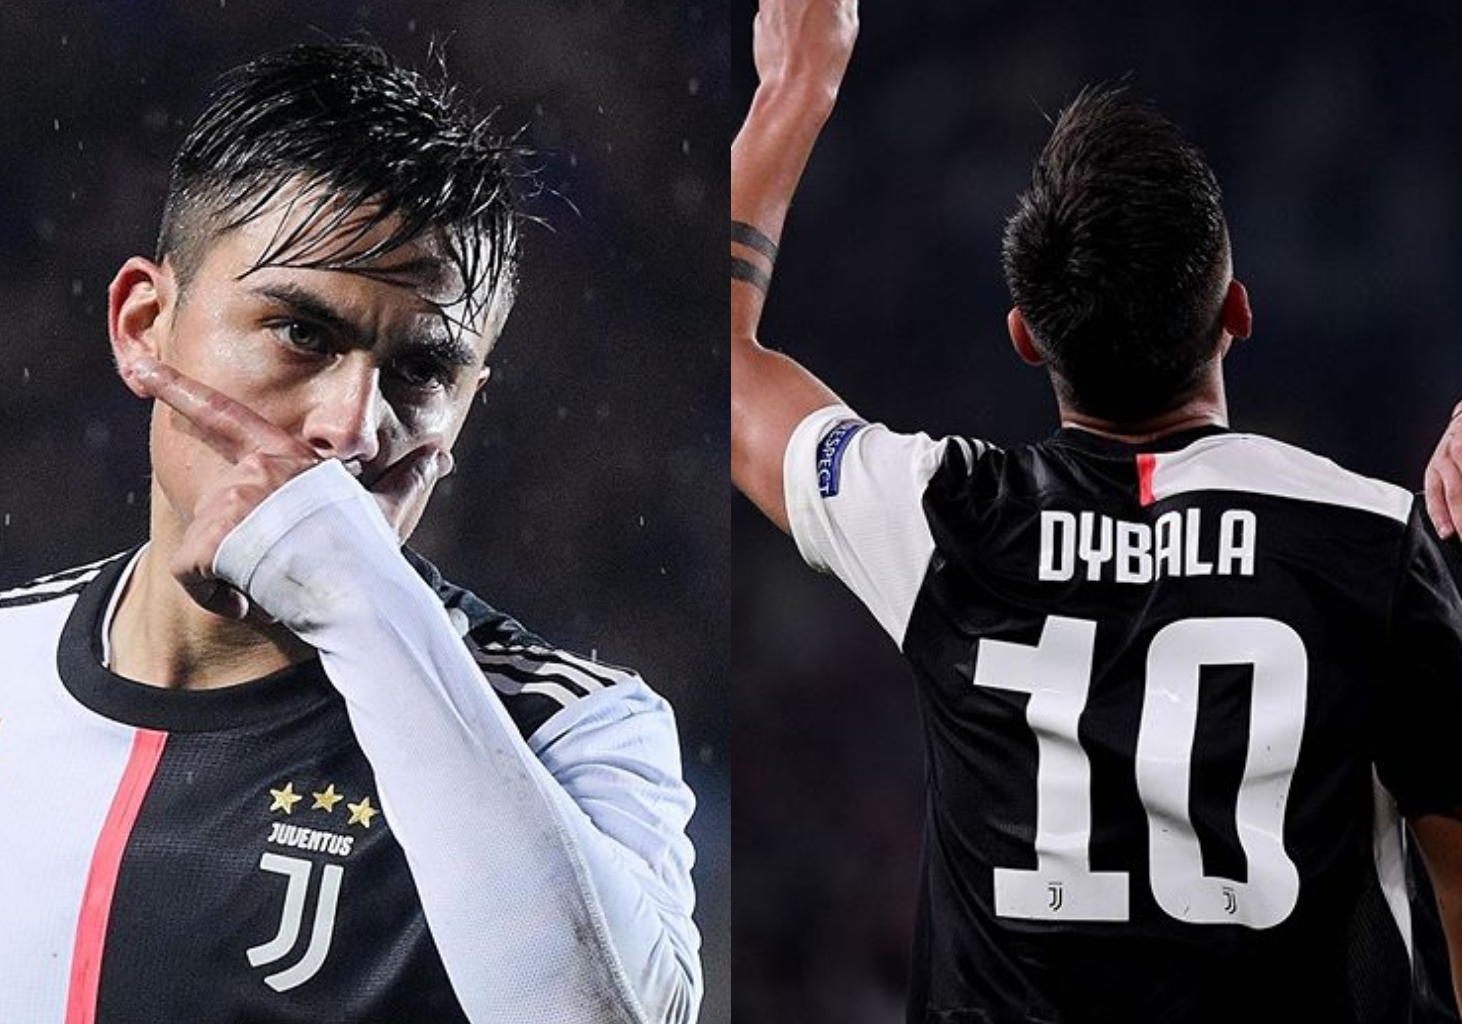 Juventus Paulo Dybala fully recovers from Covid-19, no longer isolating at home